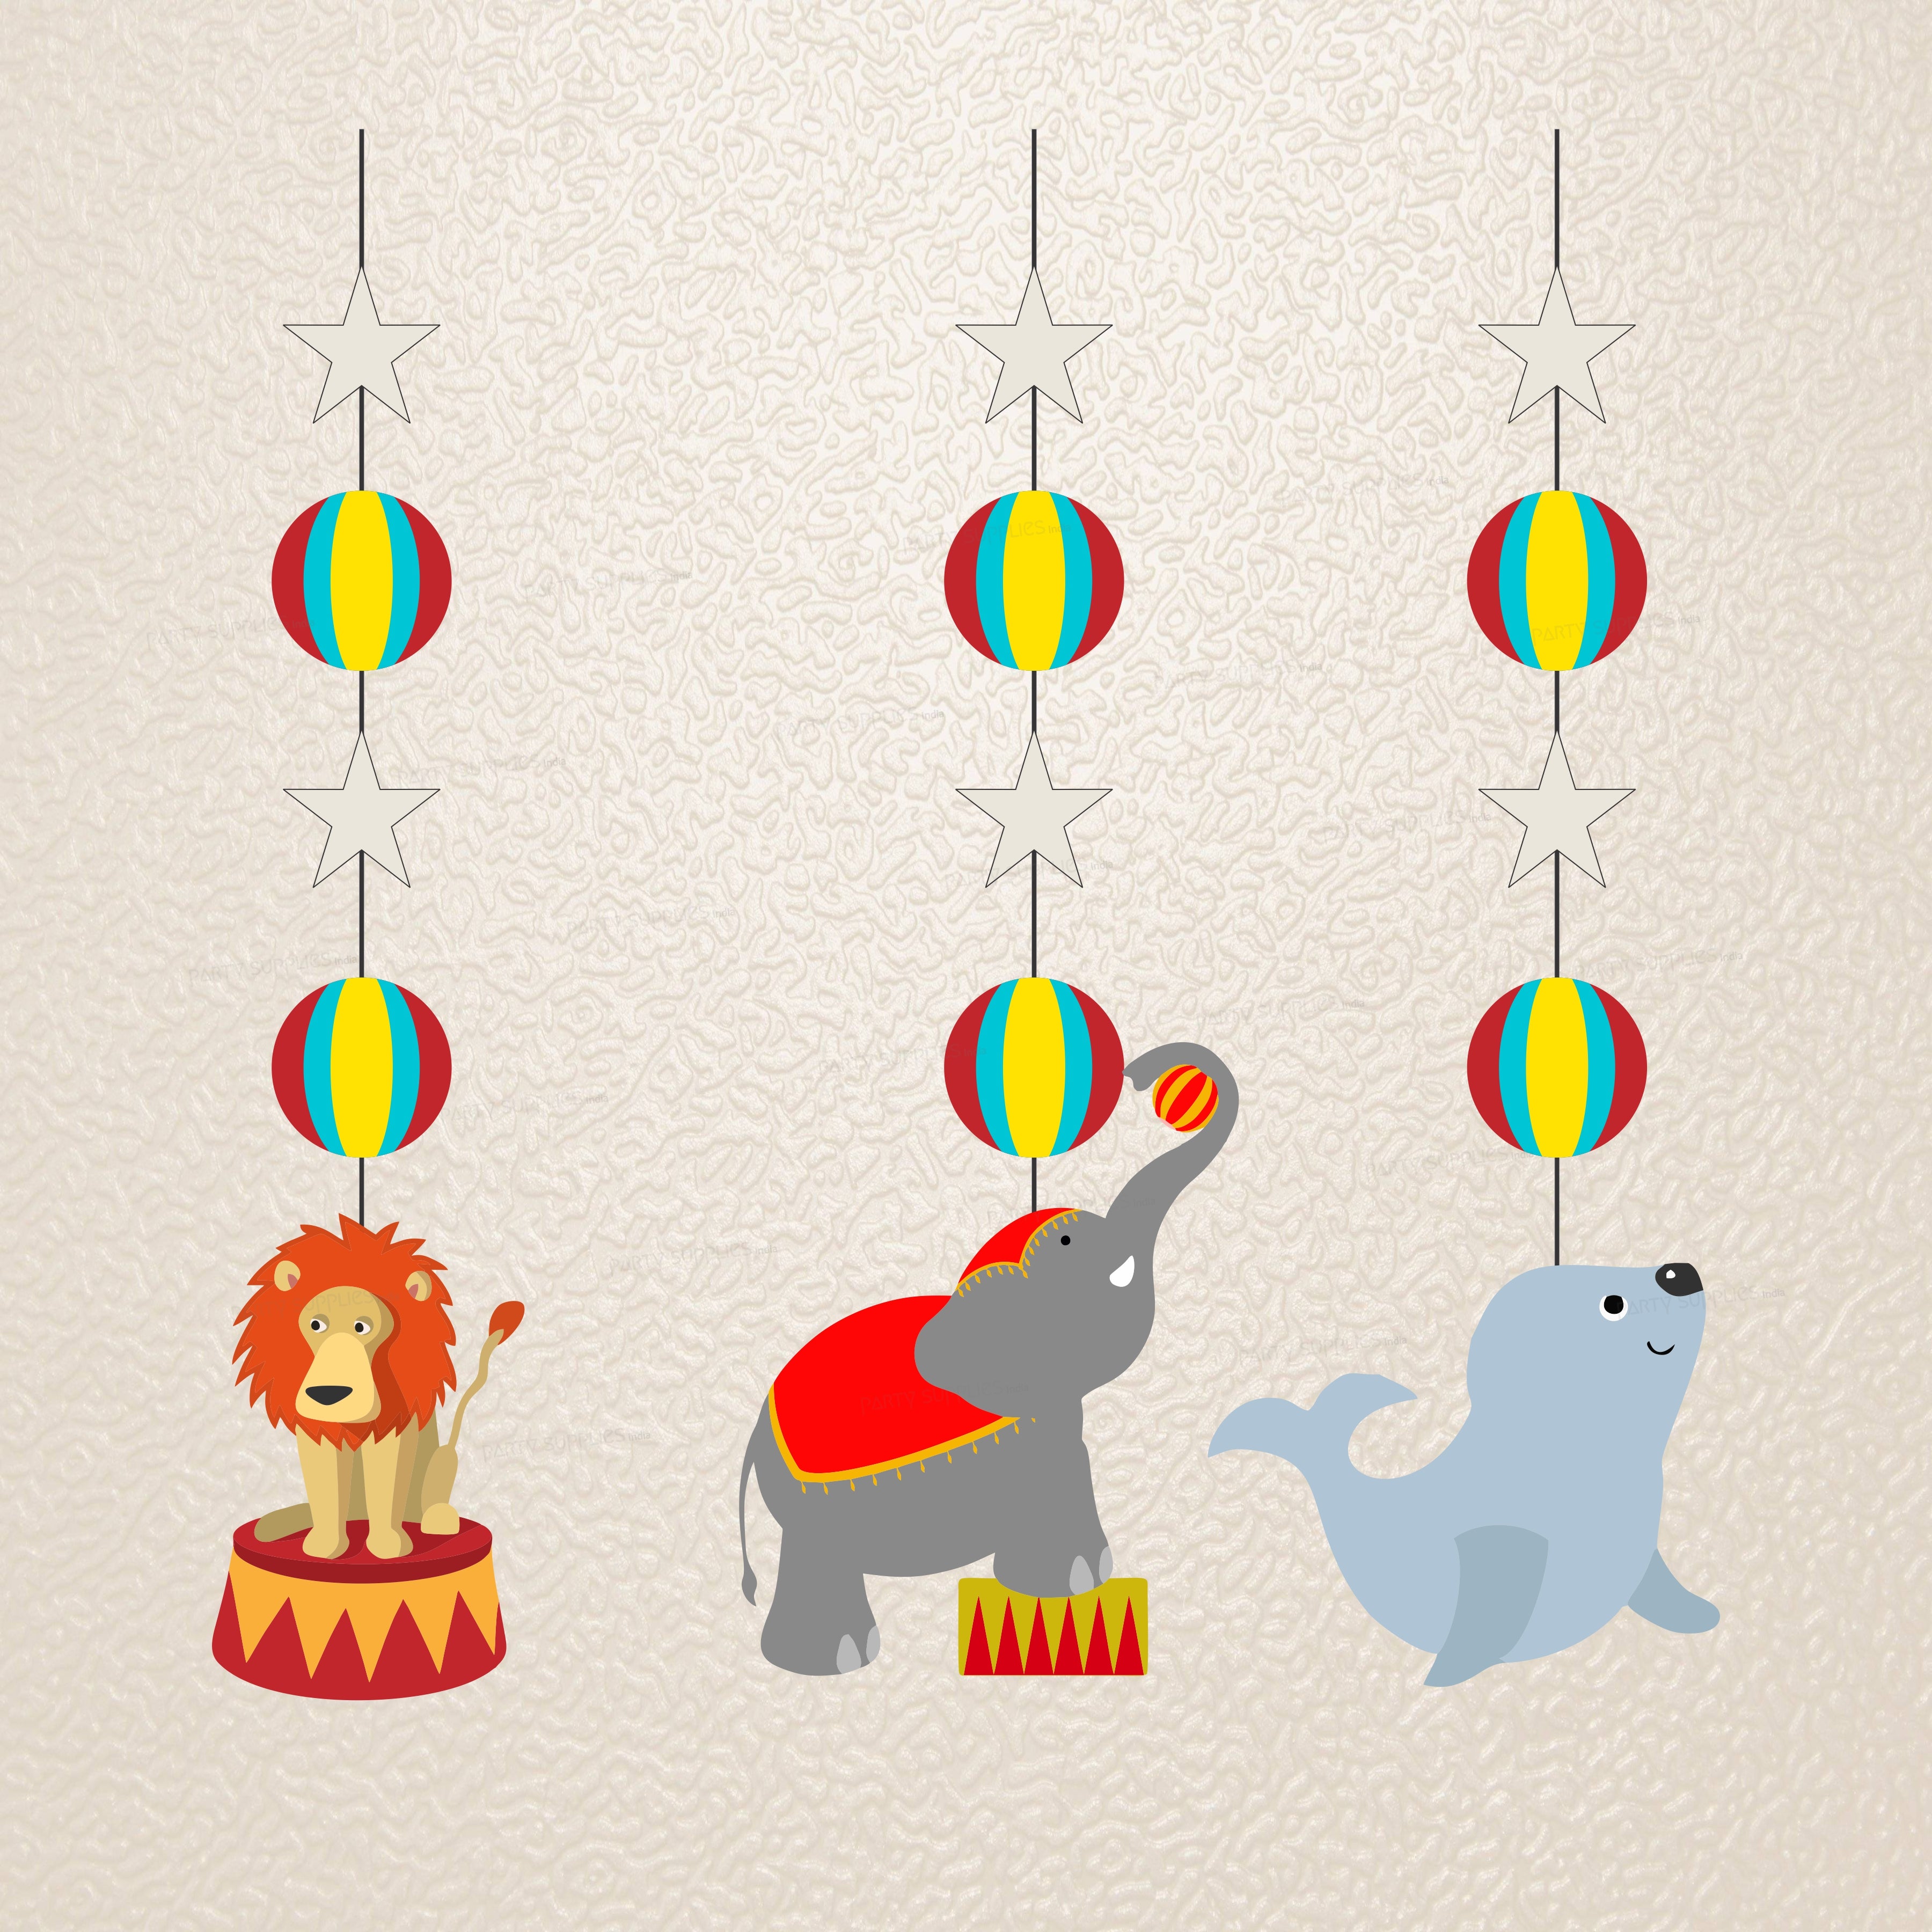 PSI Circus Theme Personalized Hanging